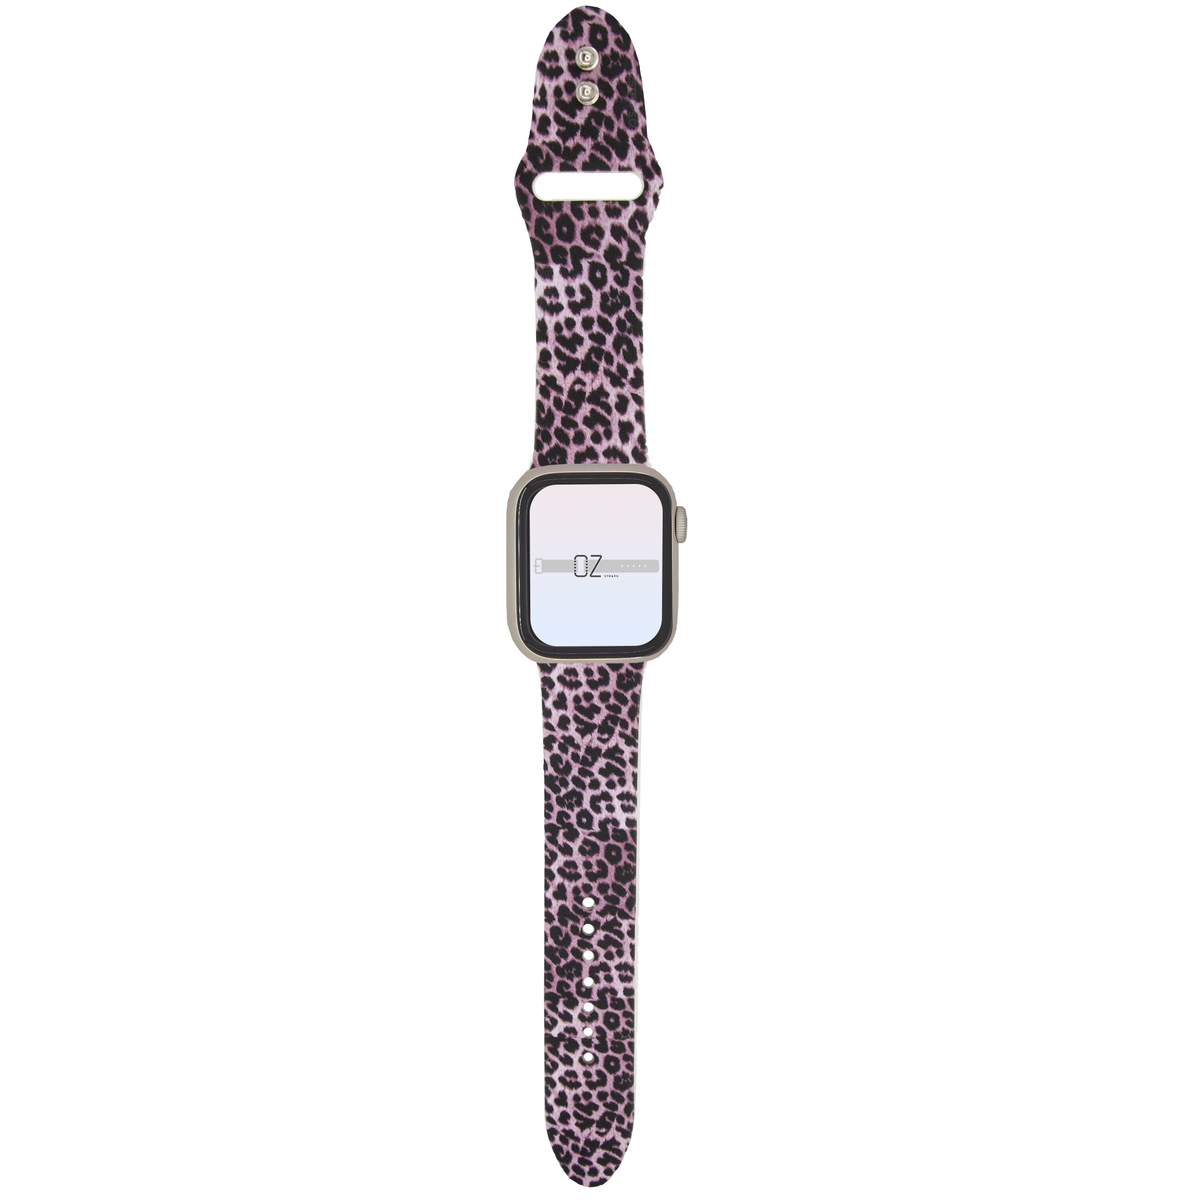 Leopard Silicone Apple Watch Band